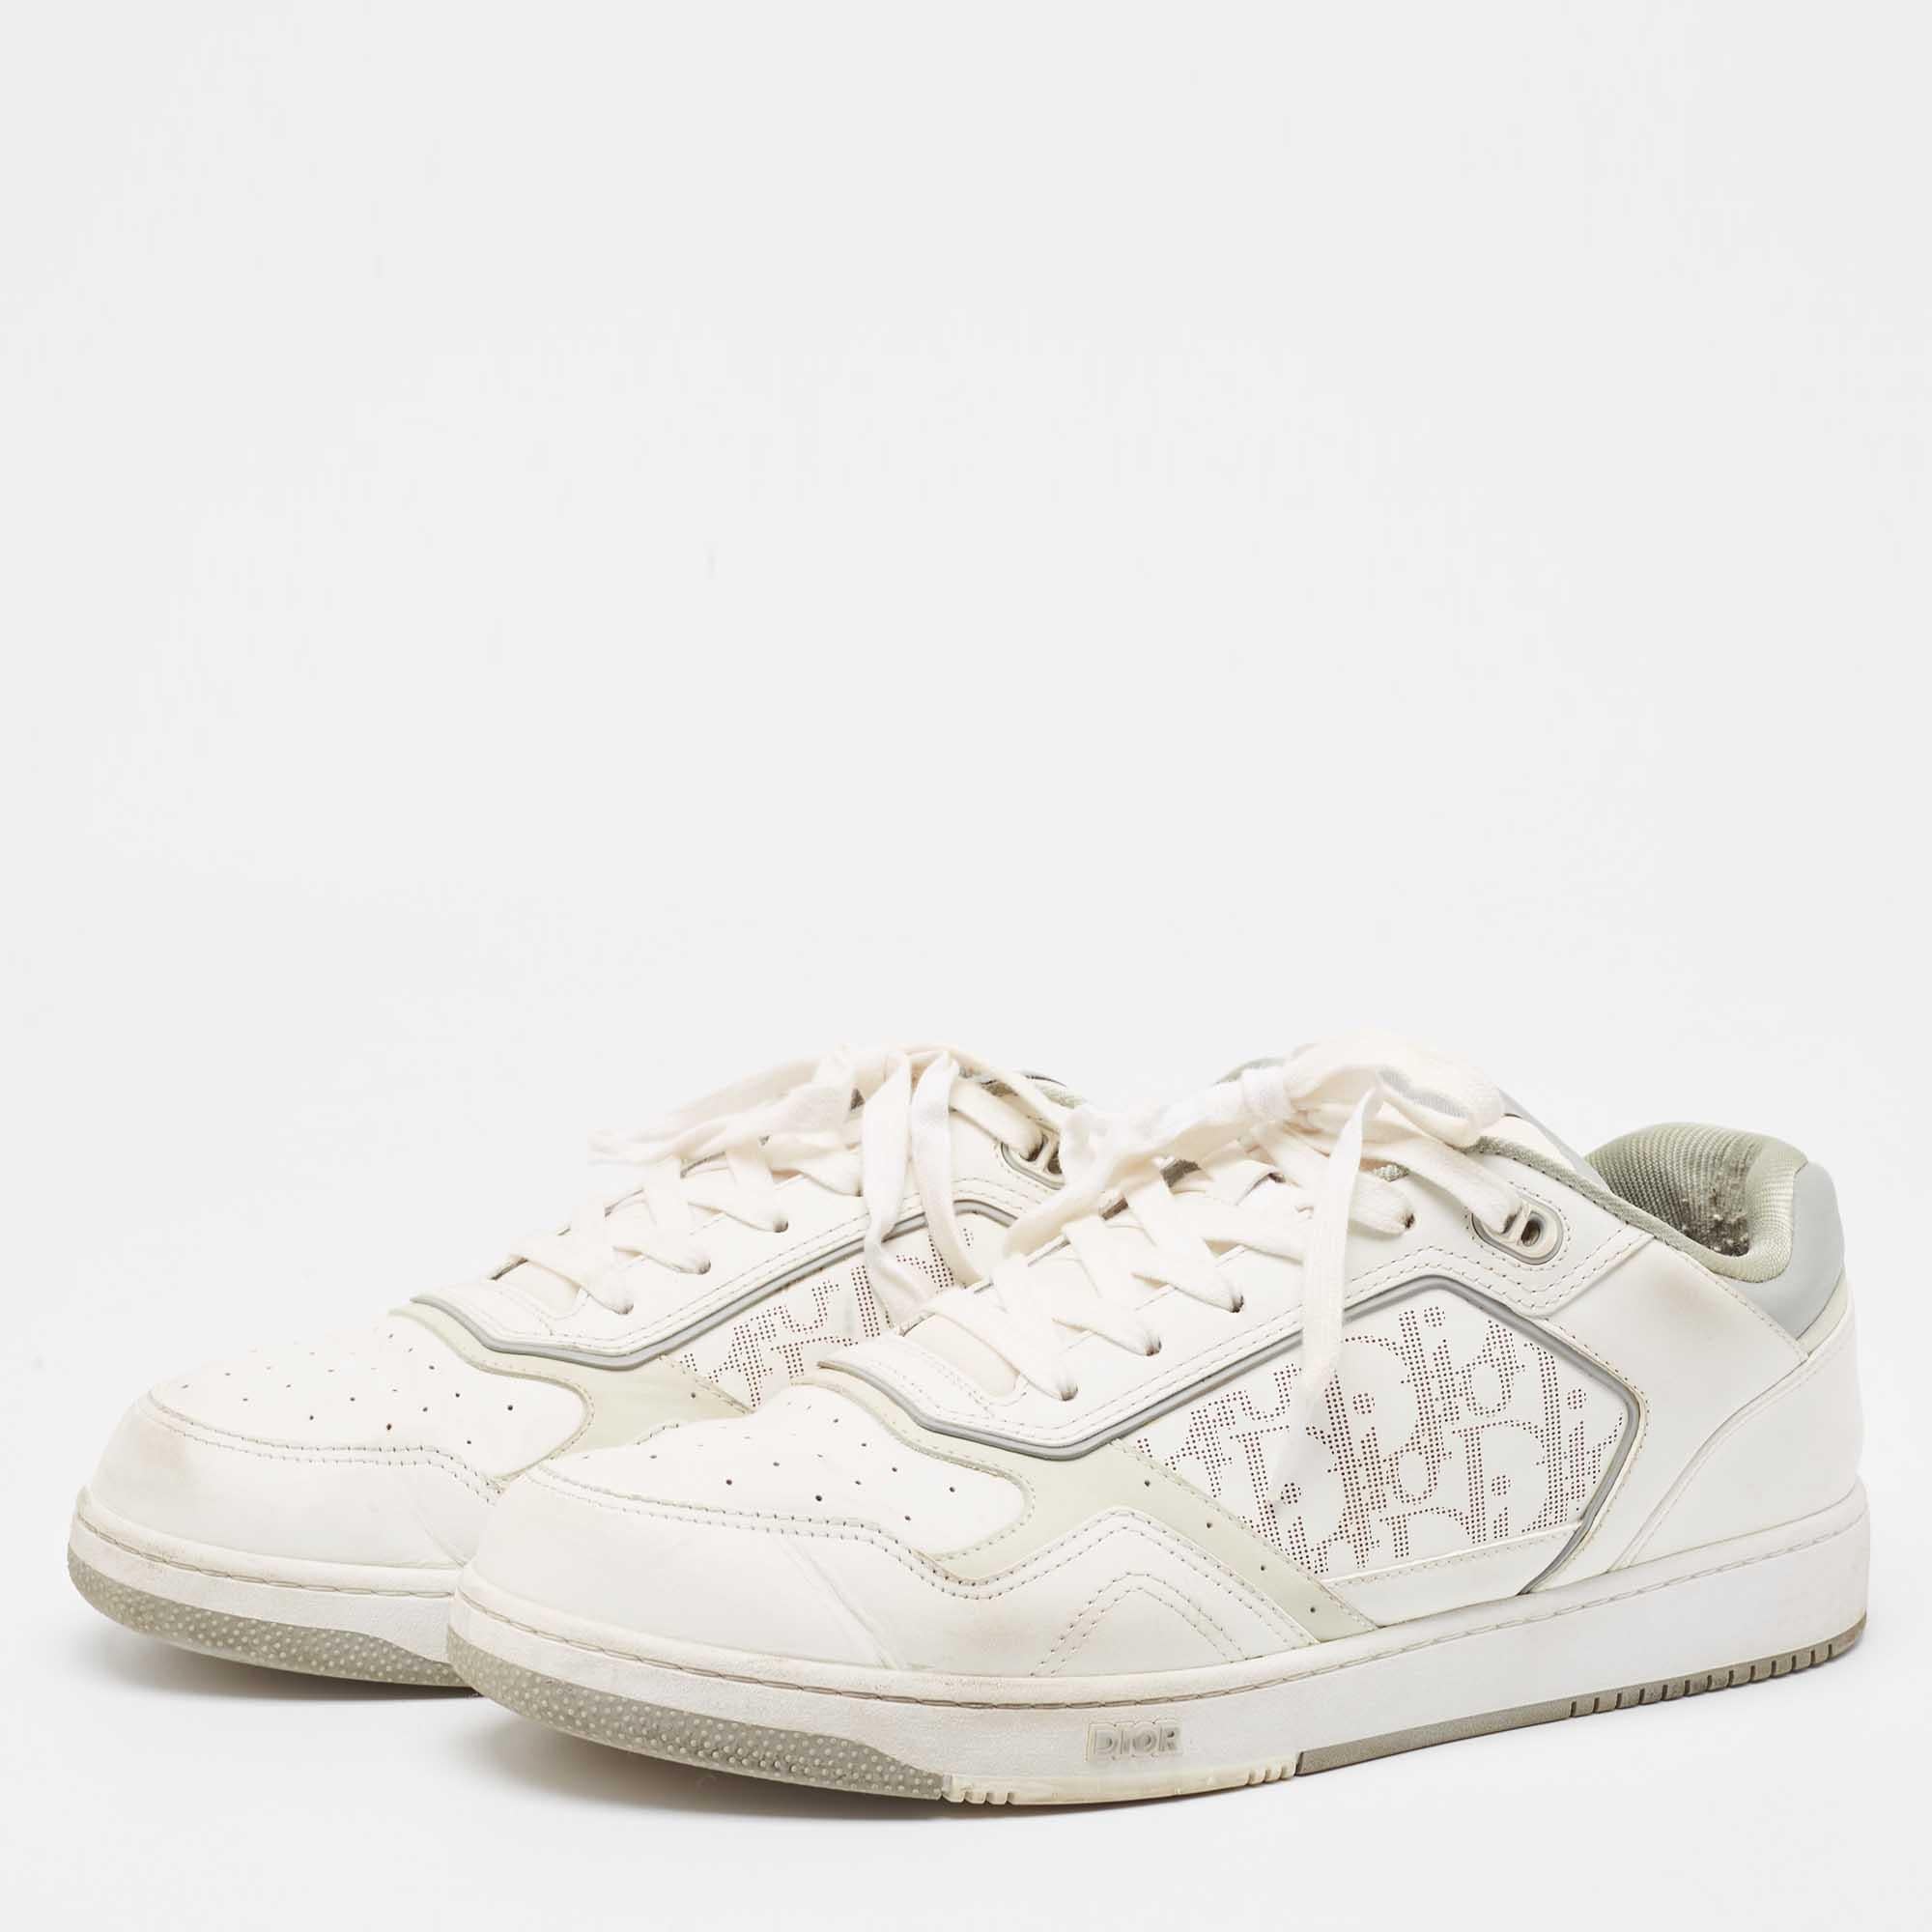 Dior White/Grey Leather B27 Low Top Sneakers Size 46 For Sale 4